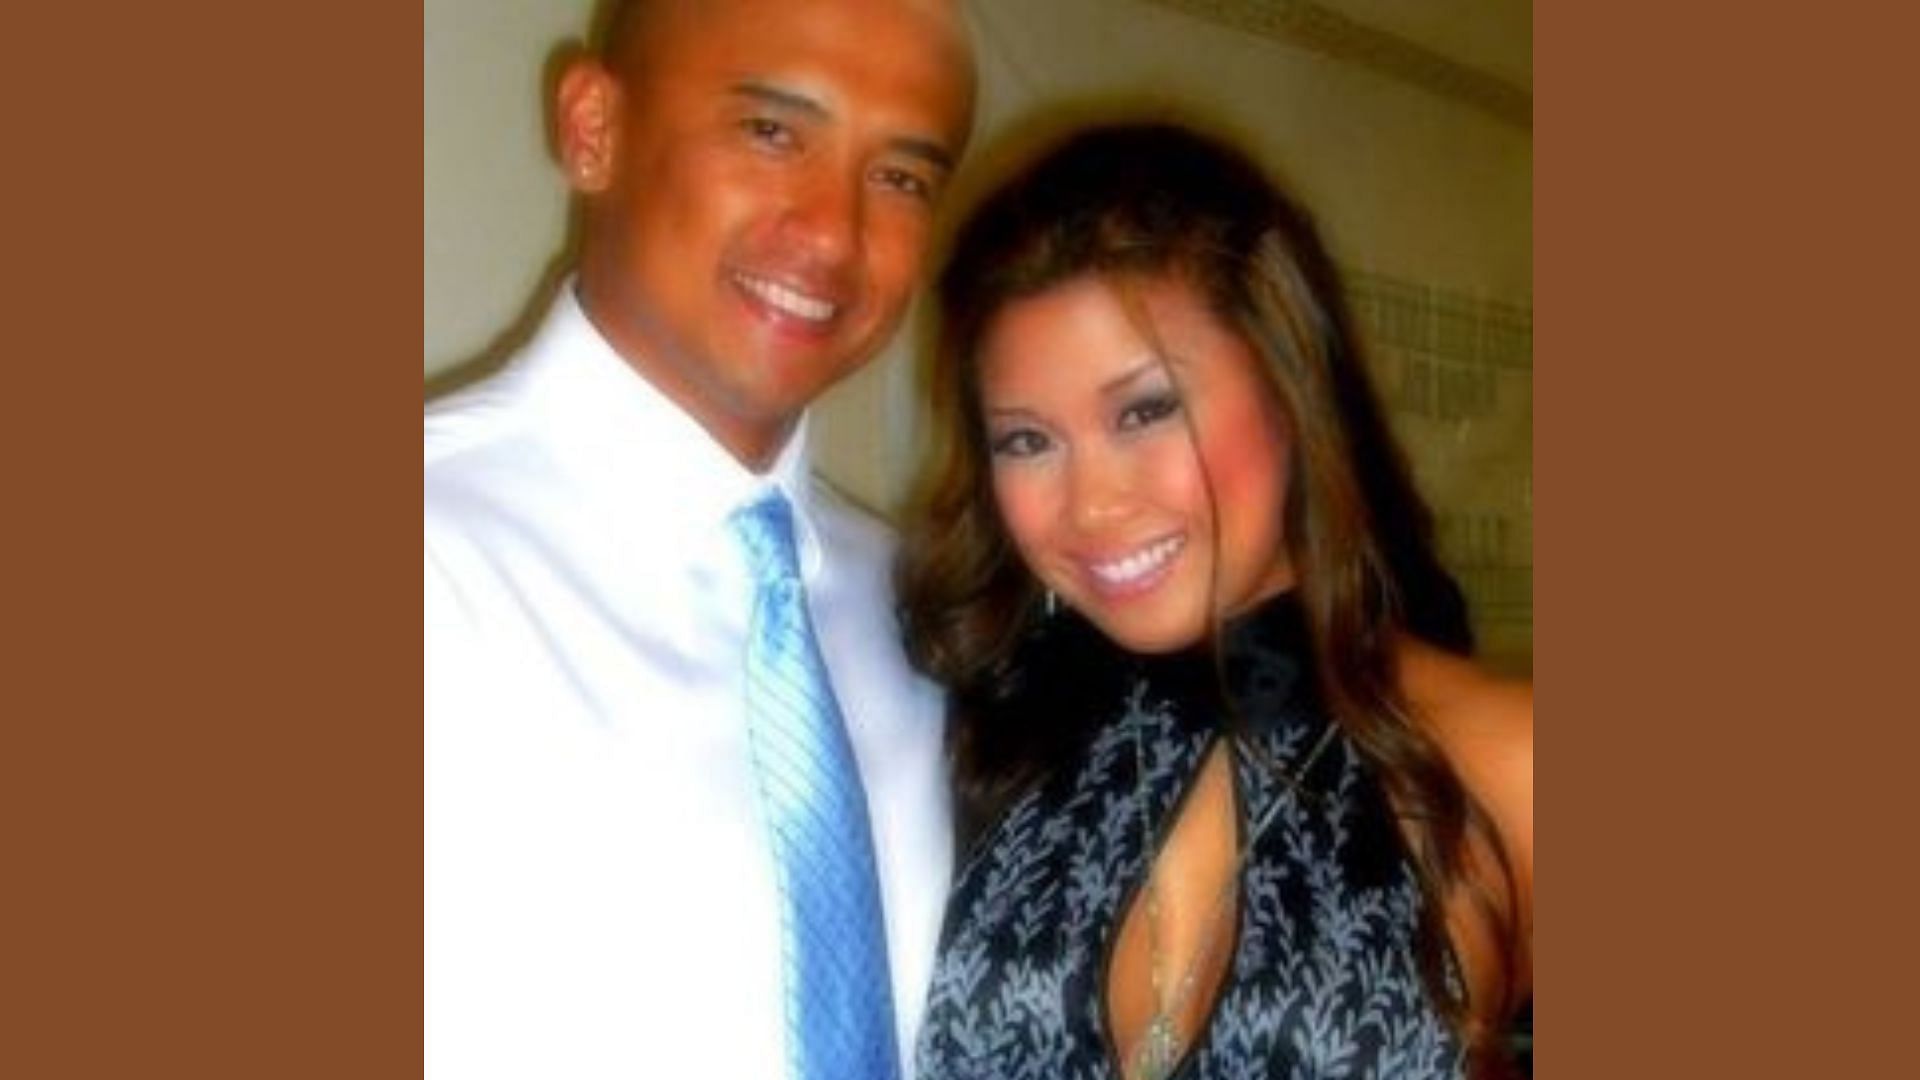 A still of Pacifico Talens Jr. with his wife, Lori Ann Talens (Image via Pinterest/Google)